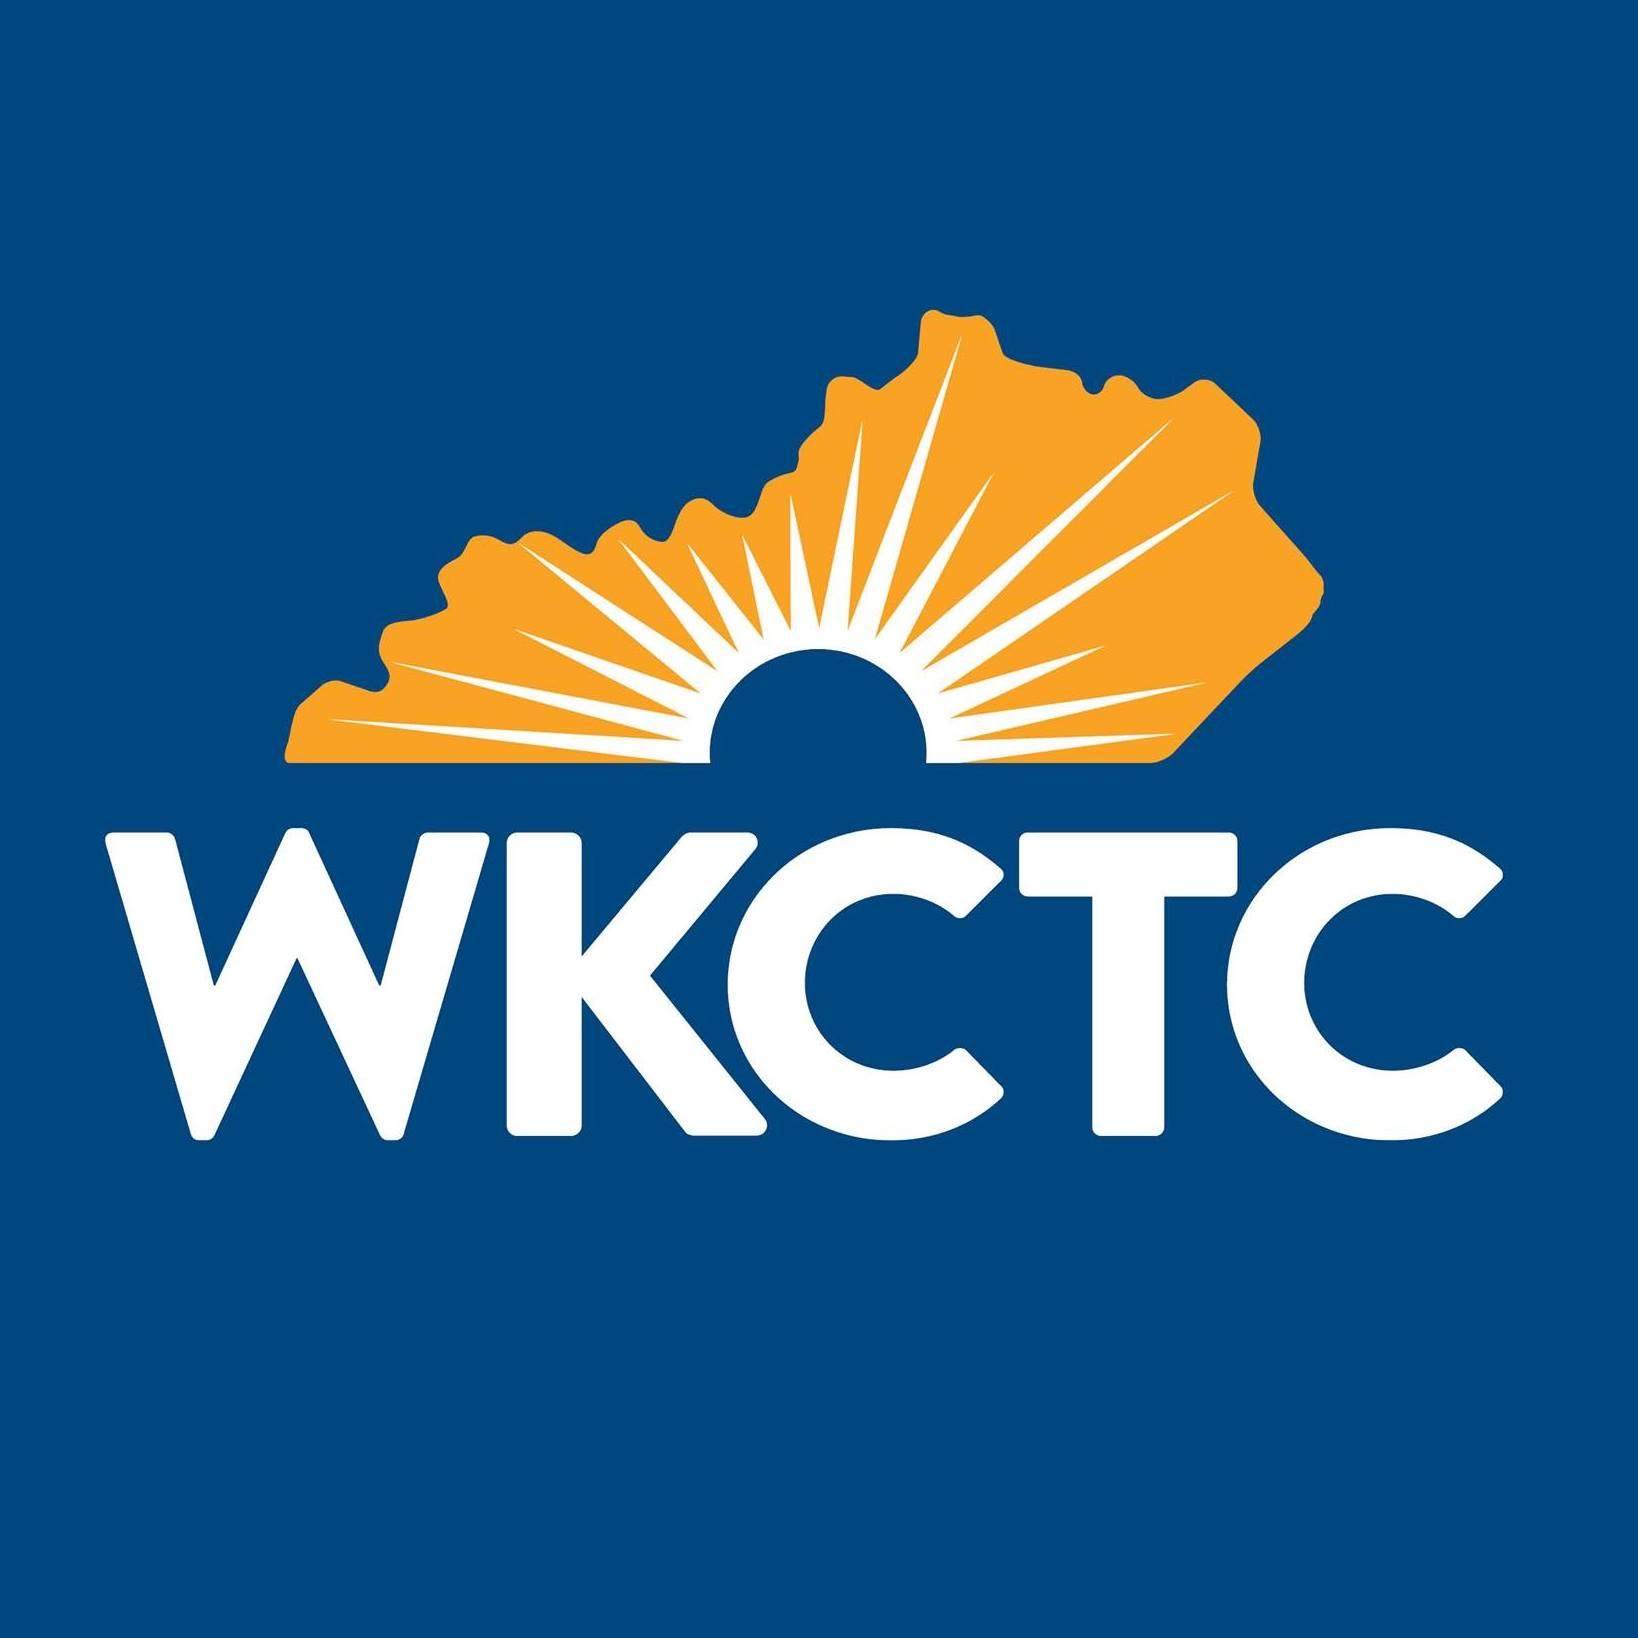 WKCTC Donating PPE To Regional Hospitals To Use 3D Printers To Make